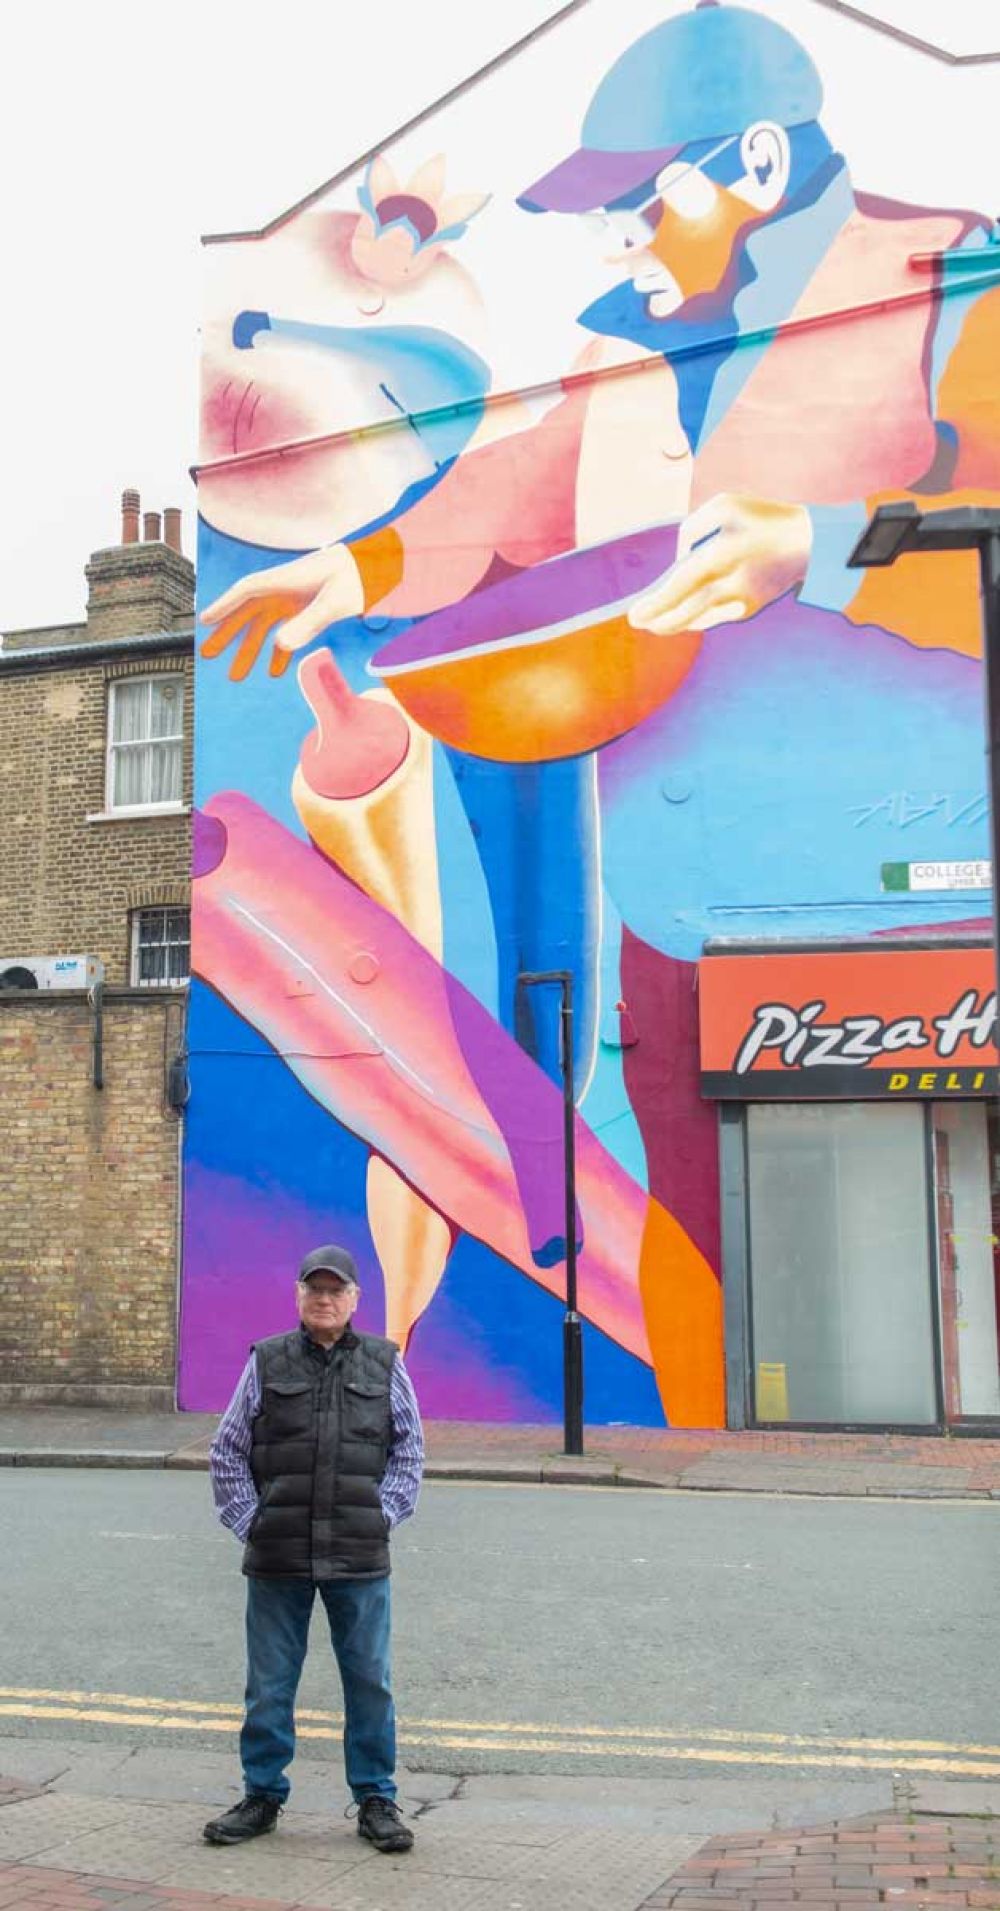 Charlie visits the Charlie Mural Fore Street 11 March 2022